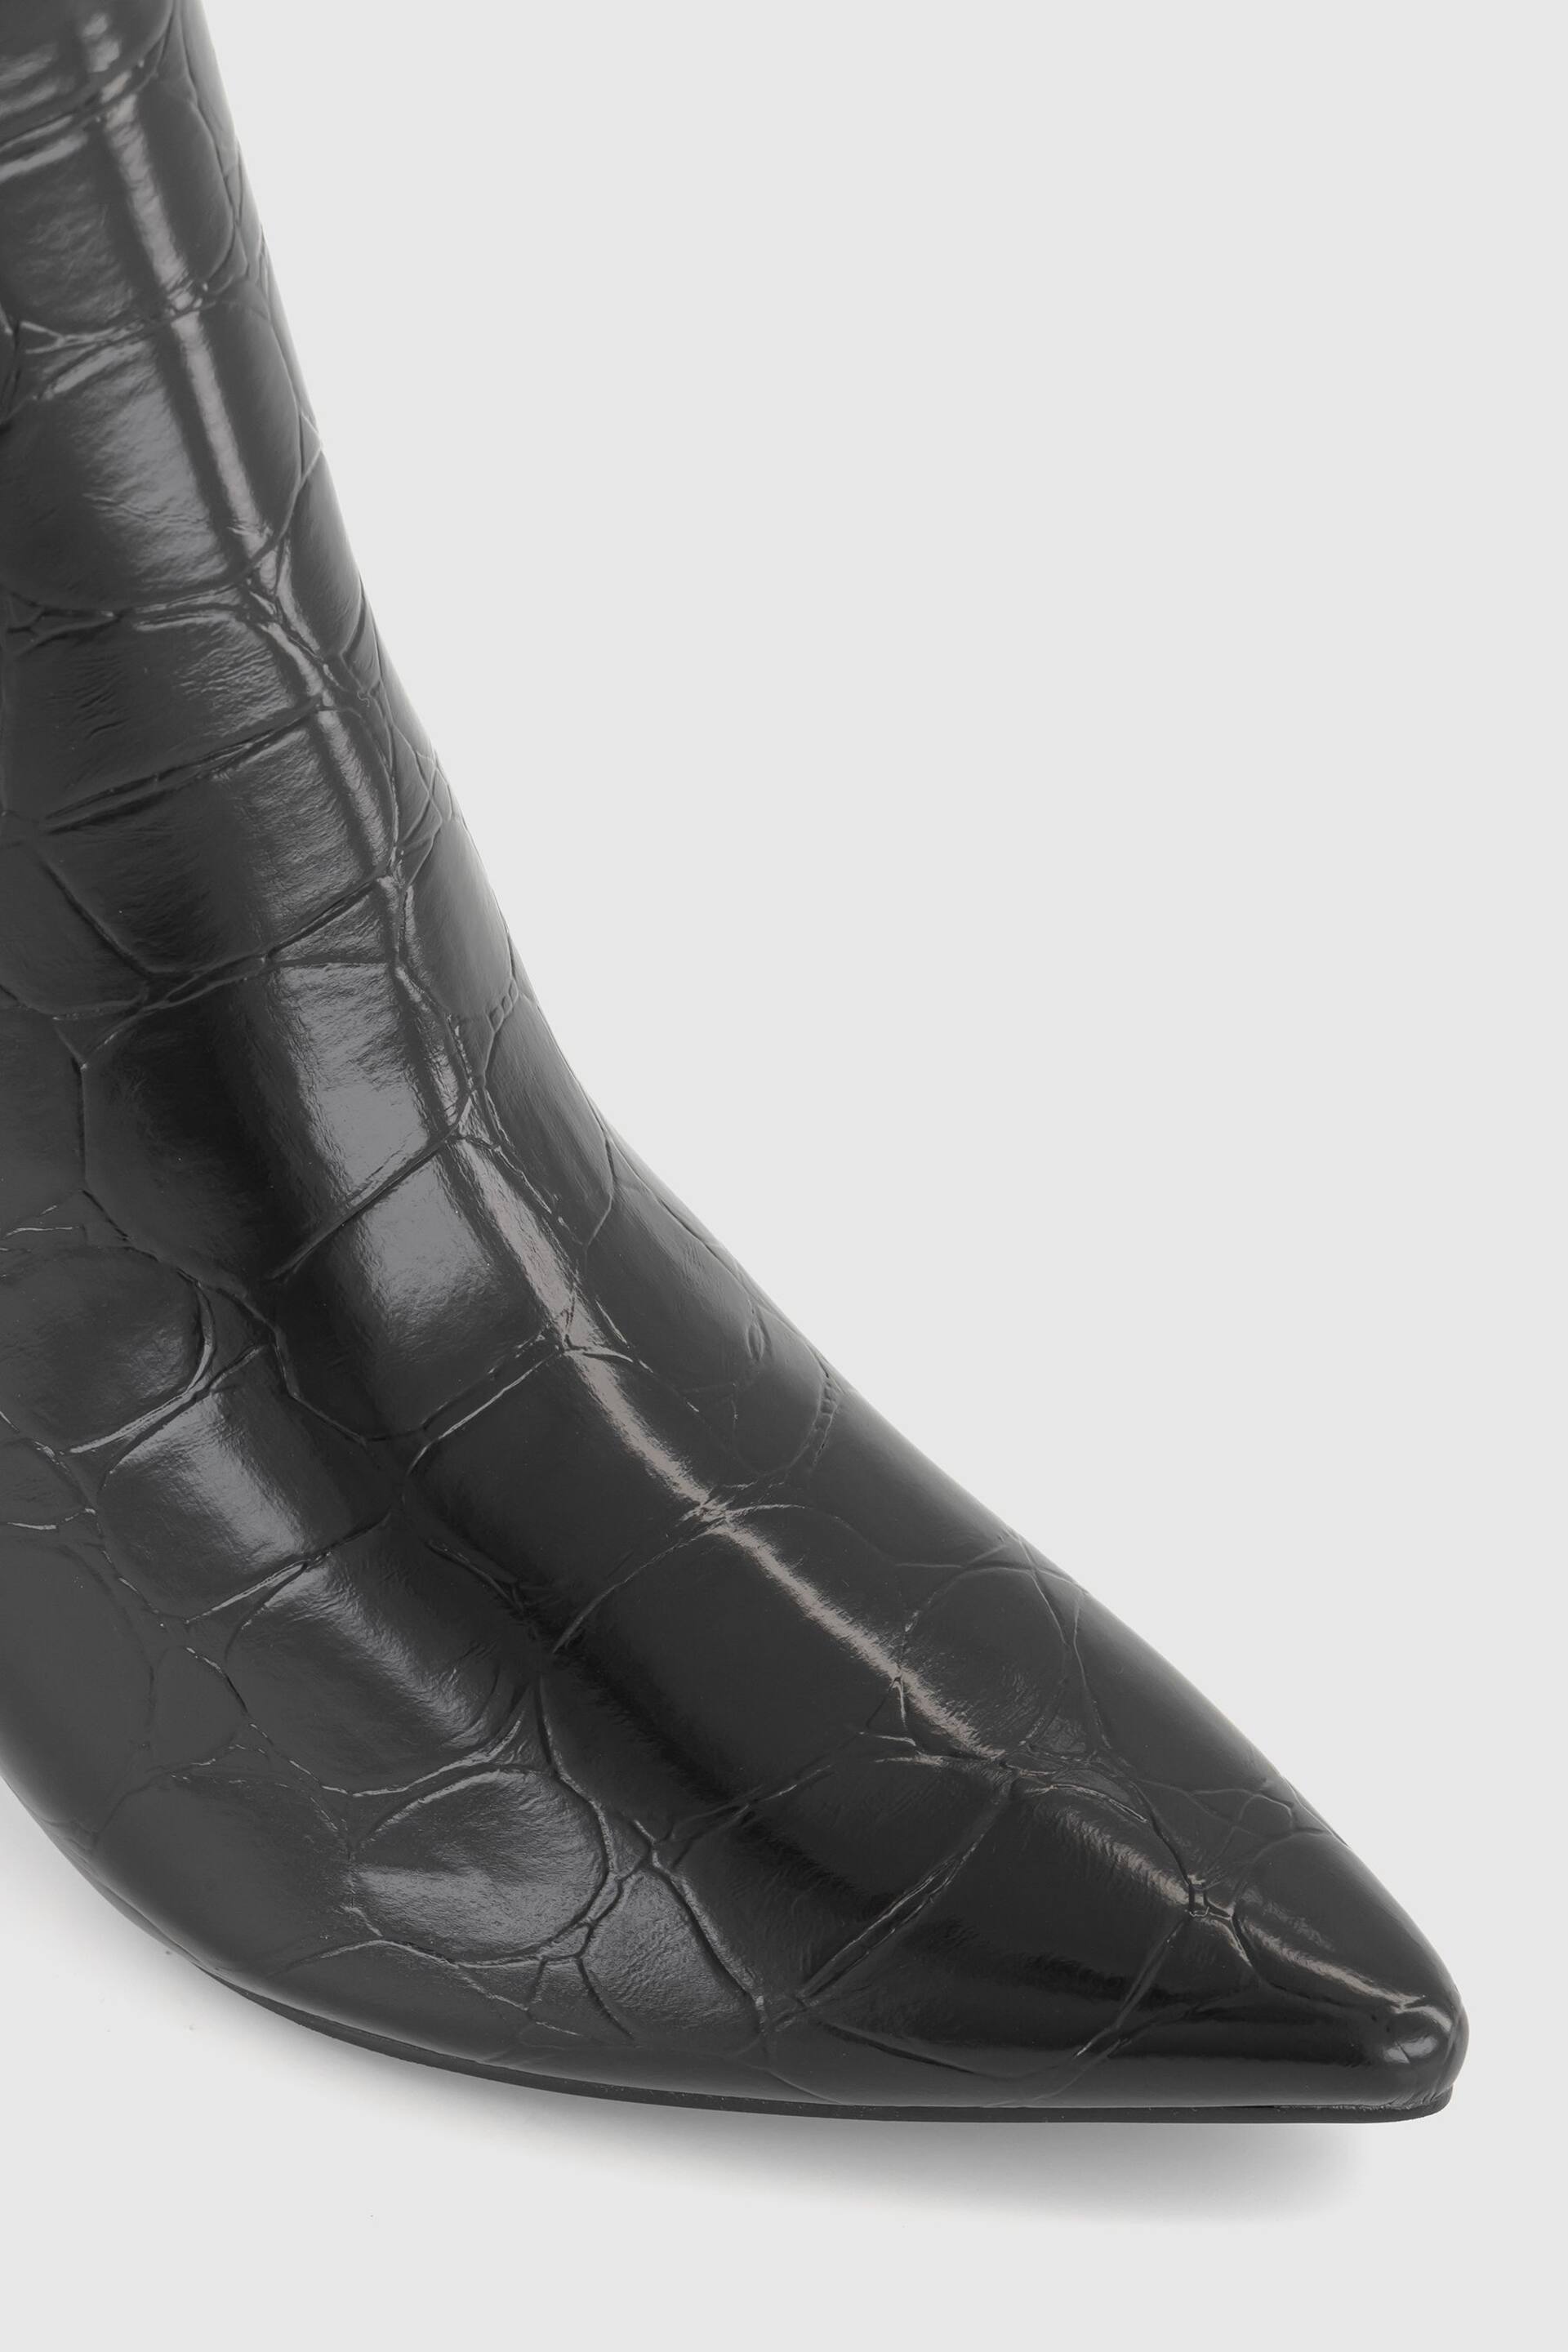 Office Black Patent Croc Effect Chelsea  Ankle Boots - Image 4 of 4